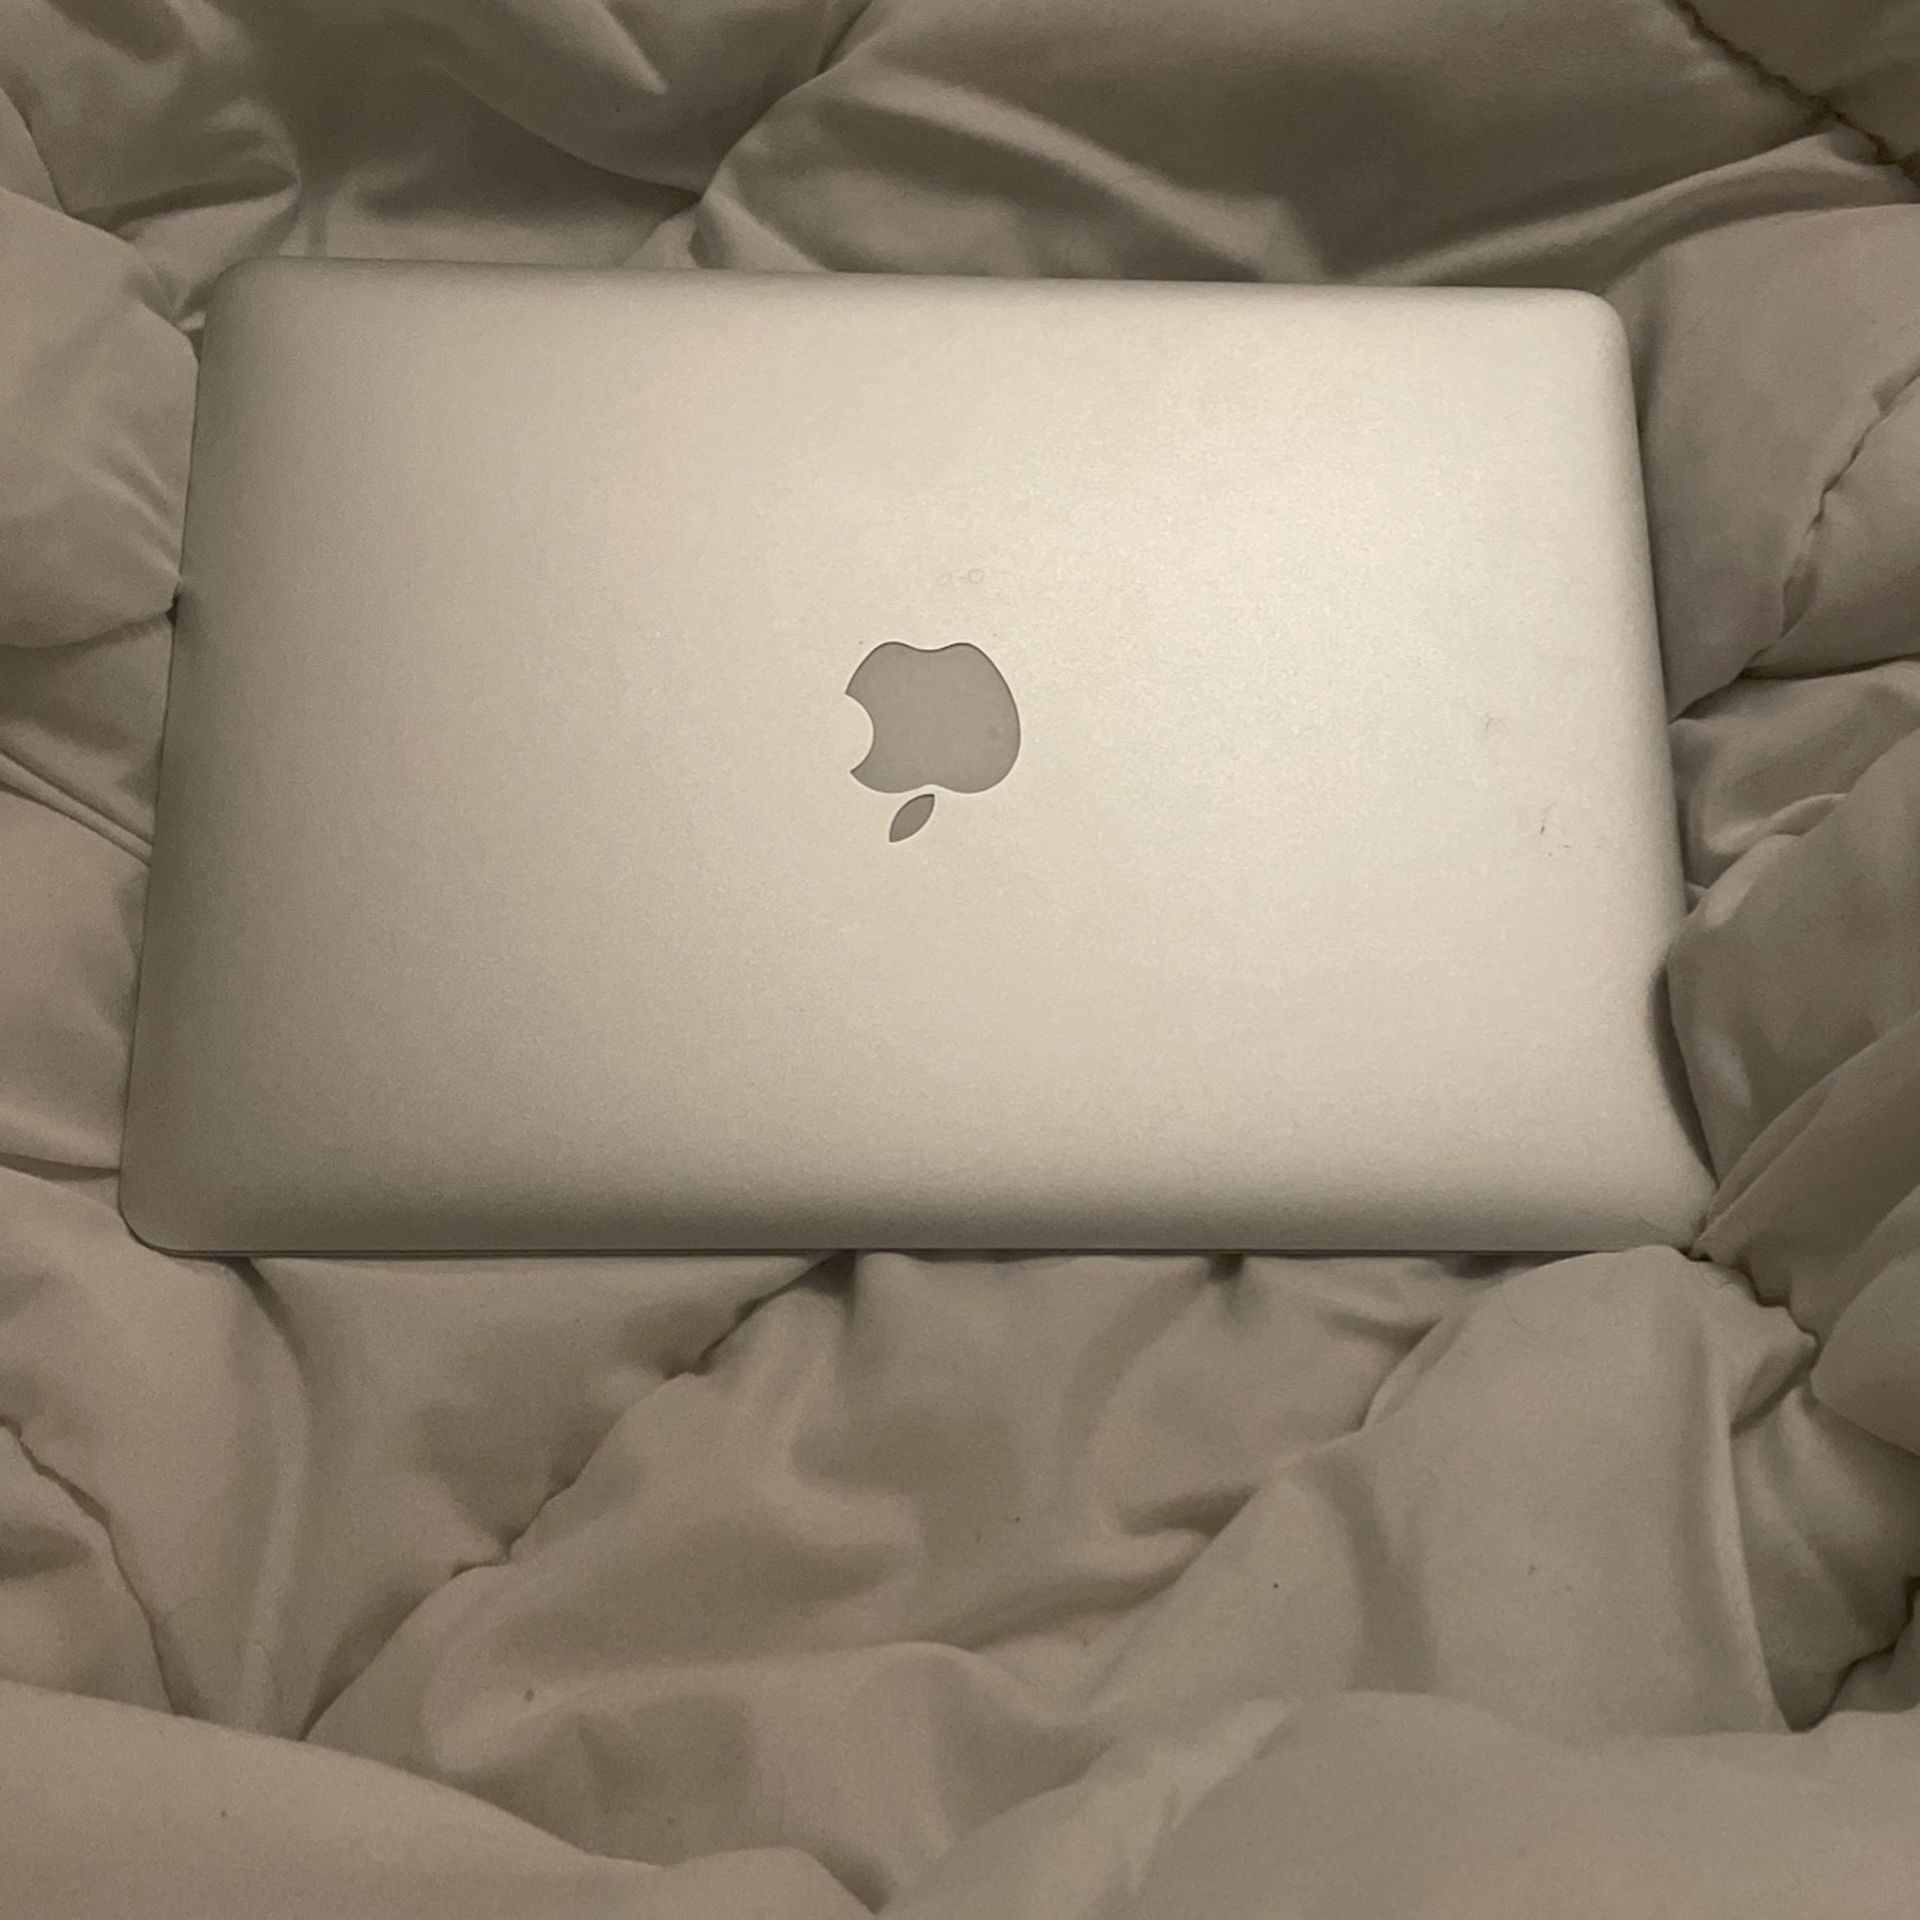 MacBook Air 13-inch, 2017 And Charger